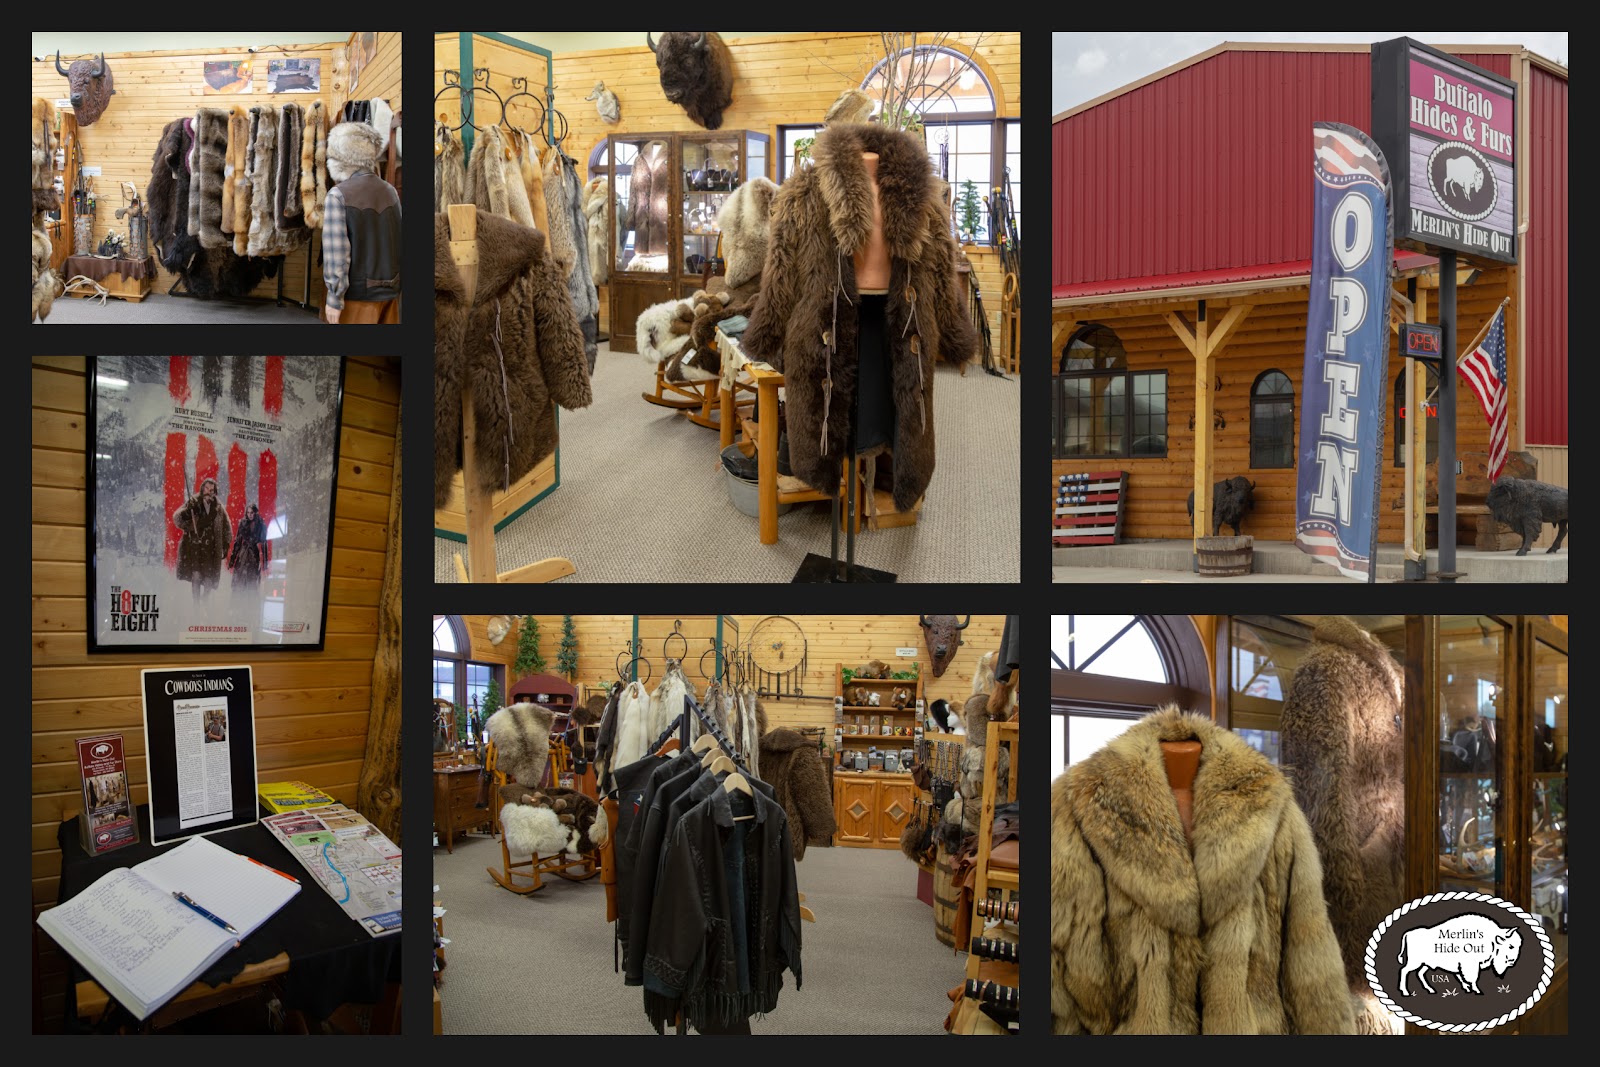 Collage of images showing the Merlin's Hide Out showroom. Fur coats, hats, rugs, and more.